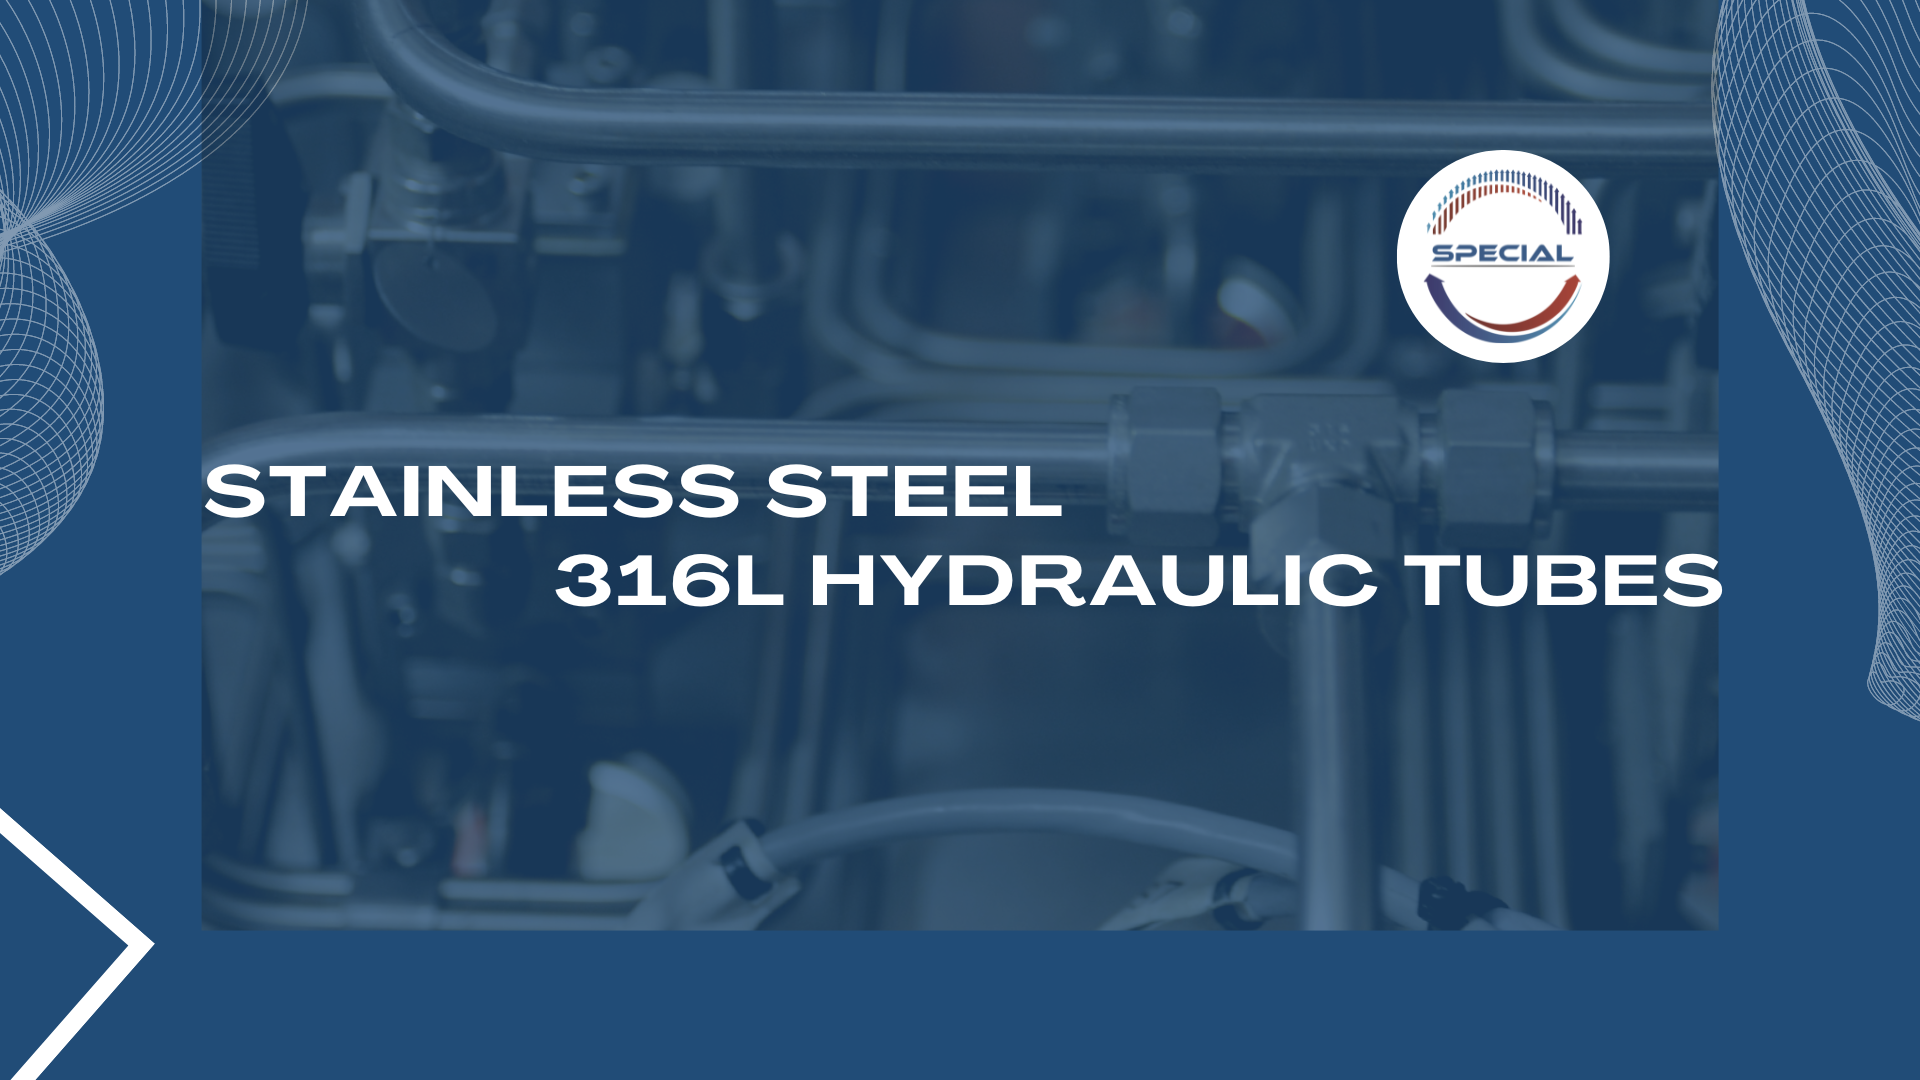 Stainless Steel 316L Hydraulic Tubes